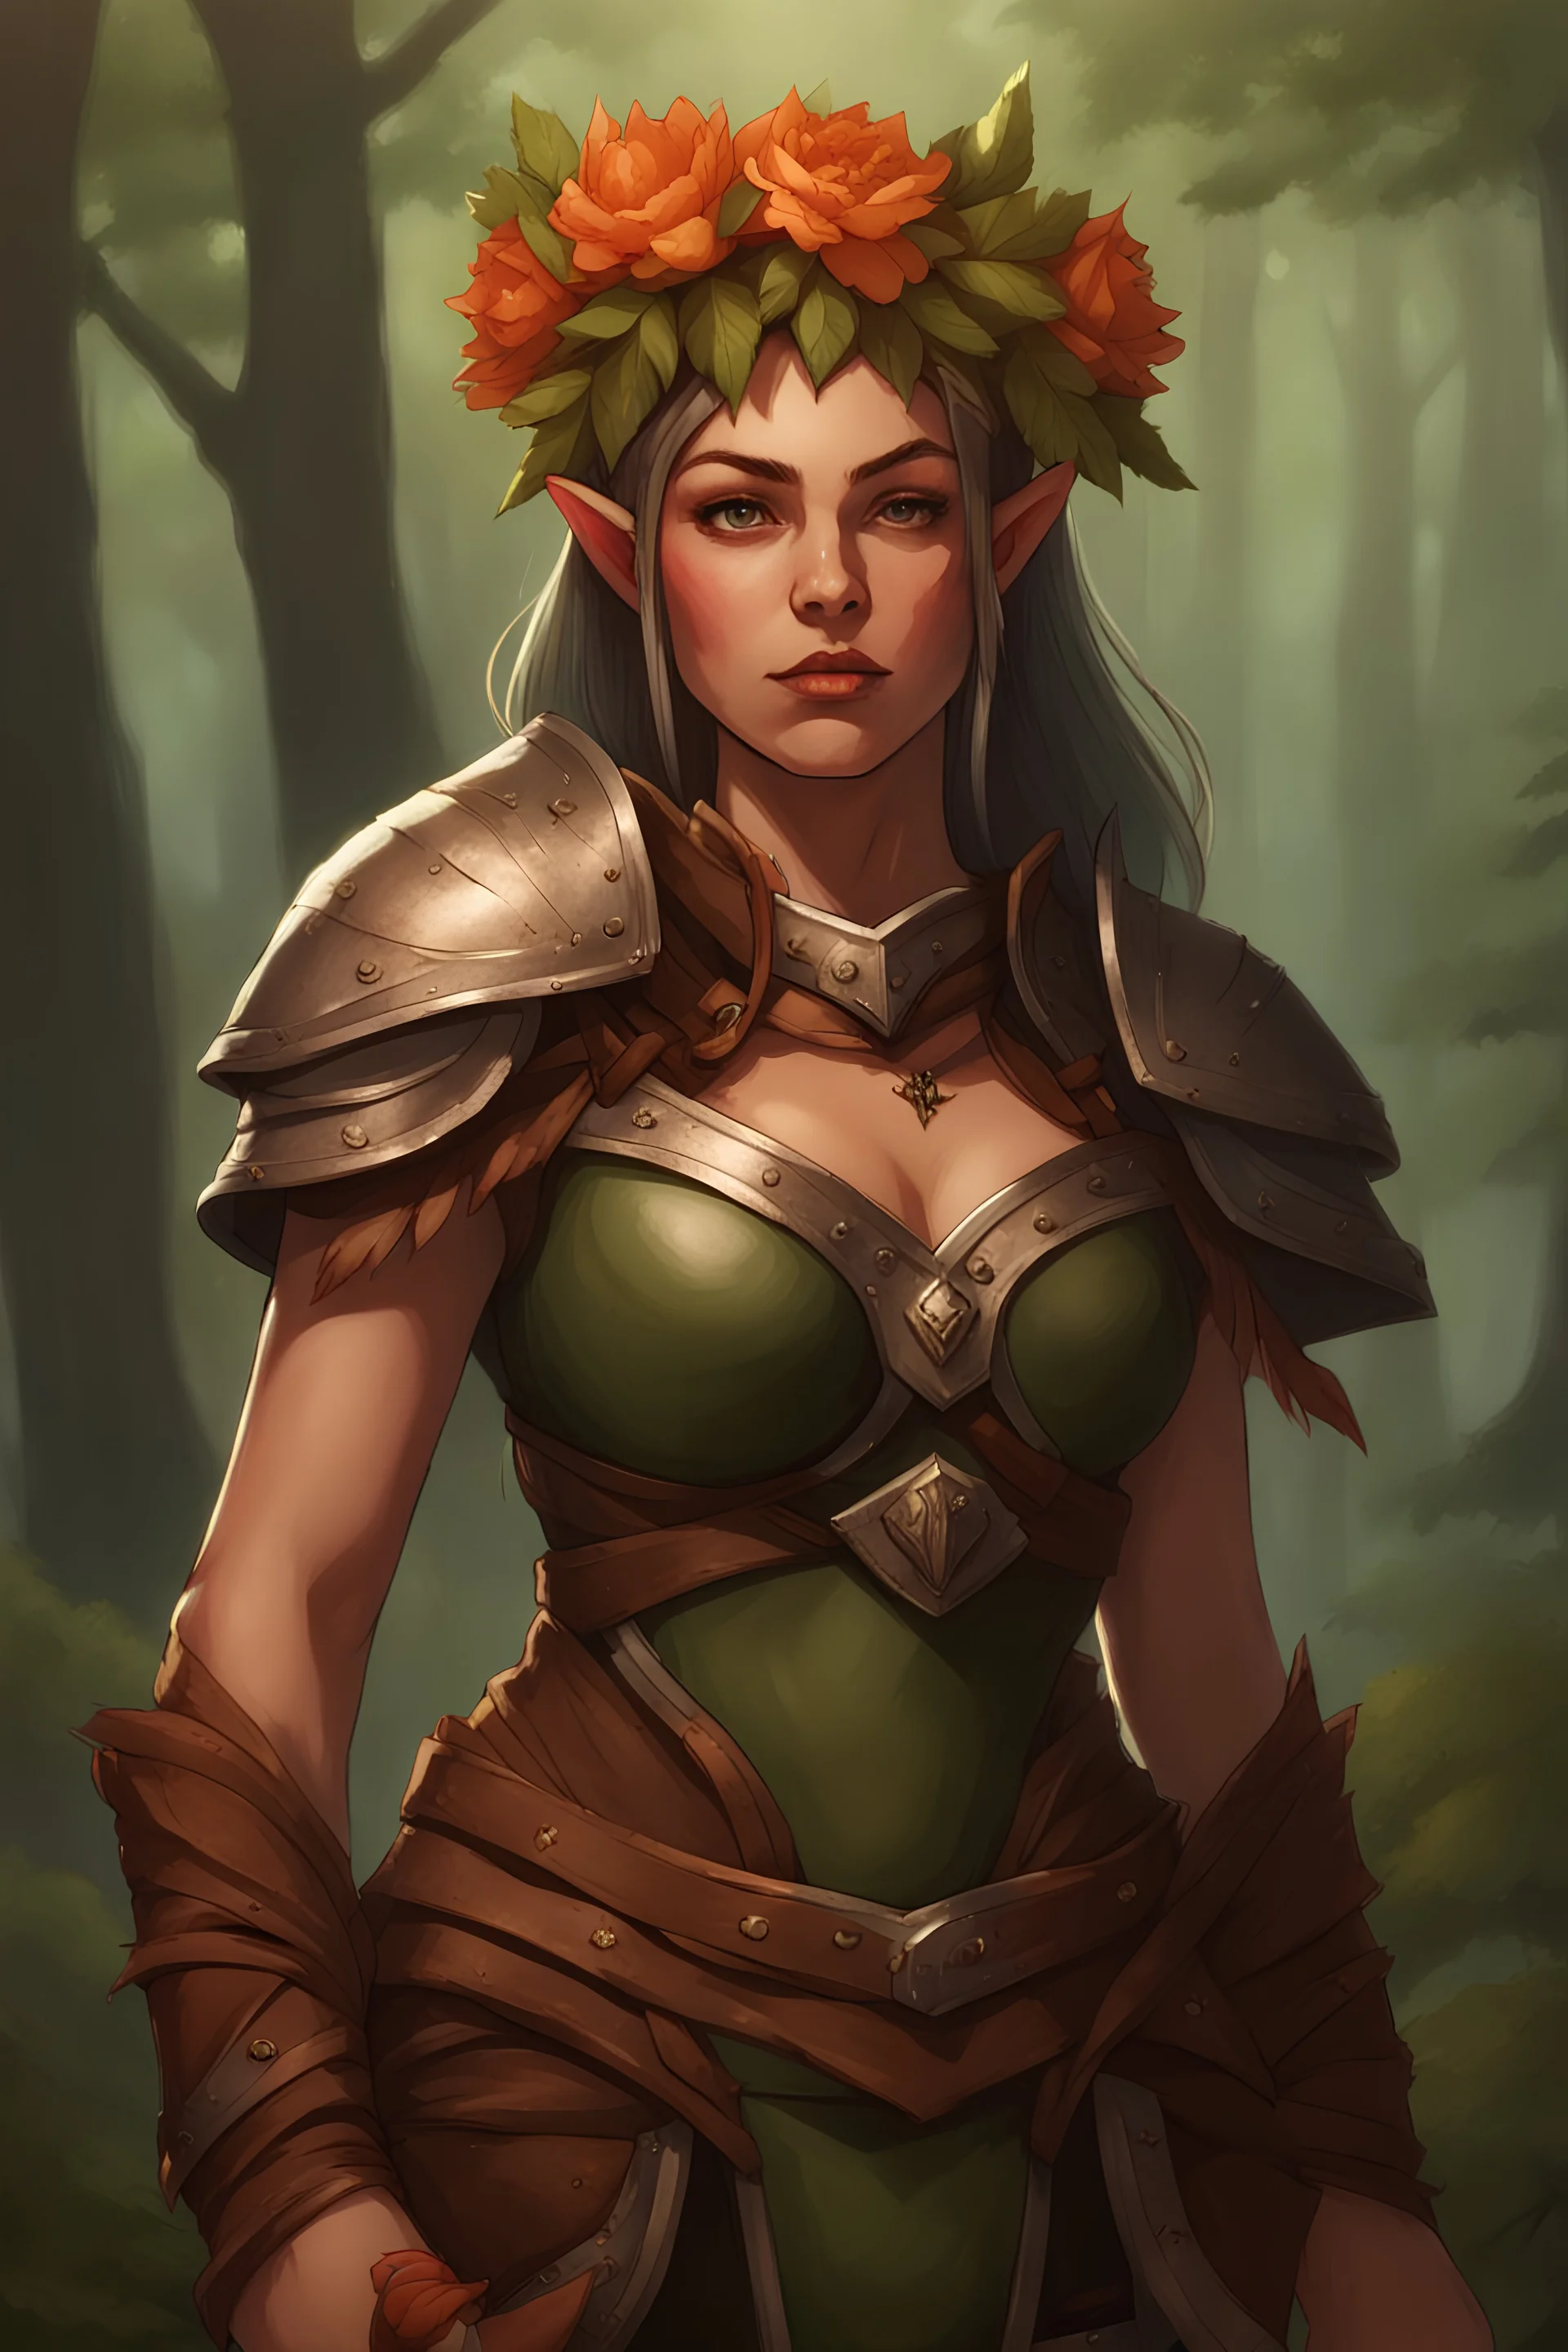 curvy dnd elven woman with big chest and hips in leather armor and a flowercrown on her head, standing in the forest